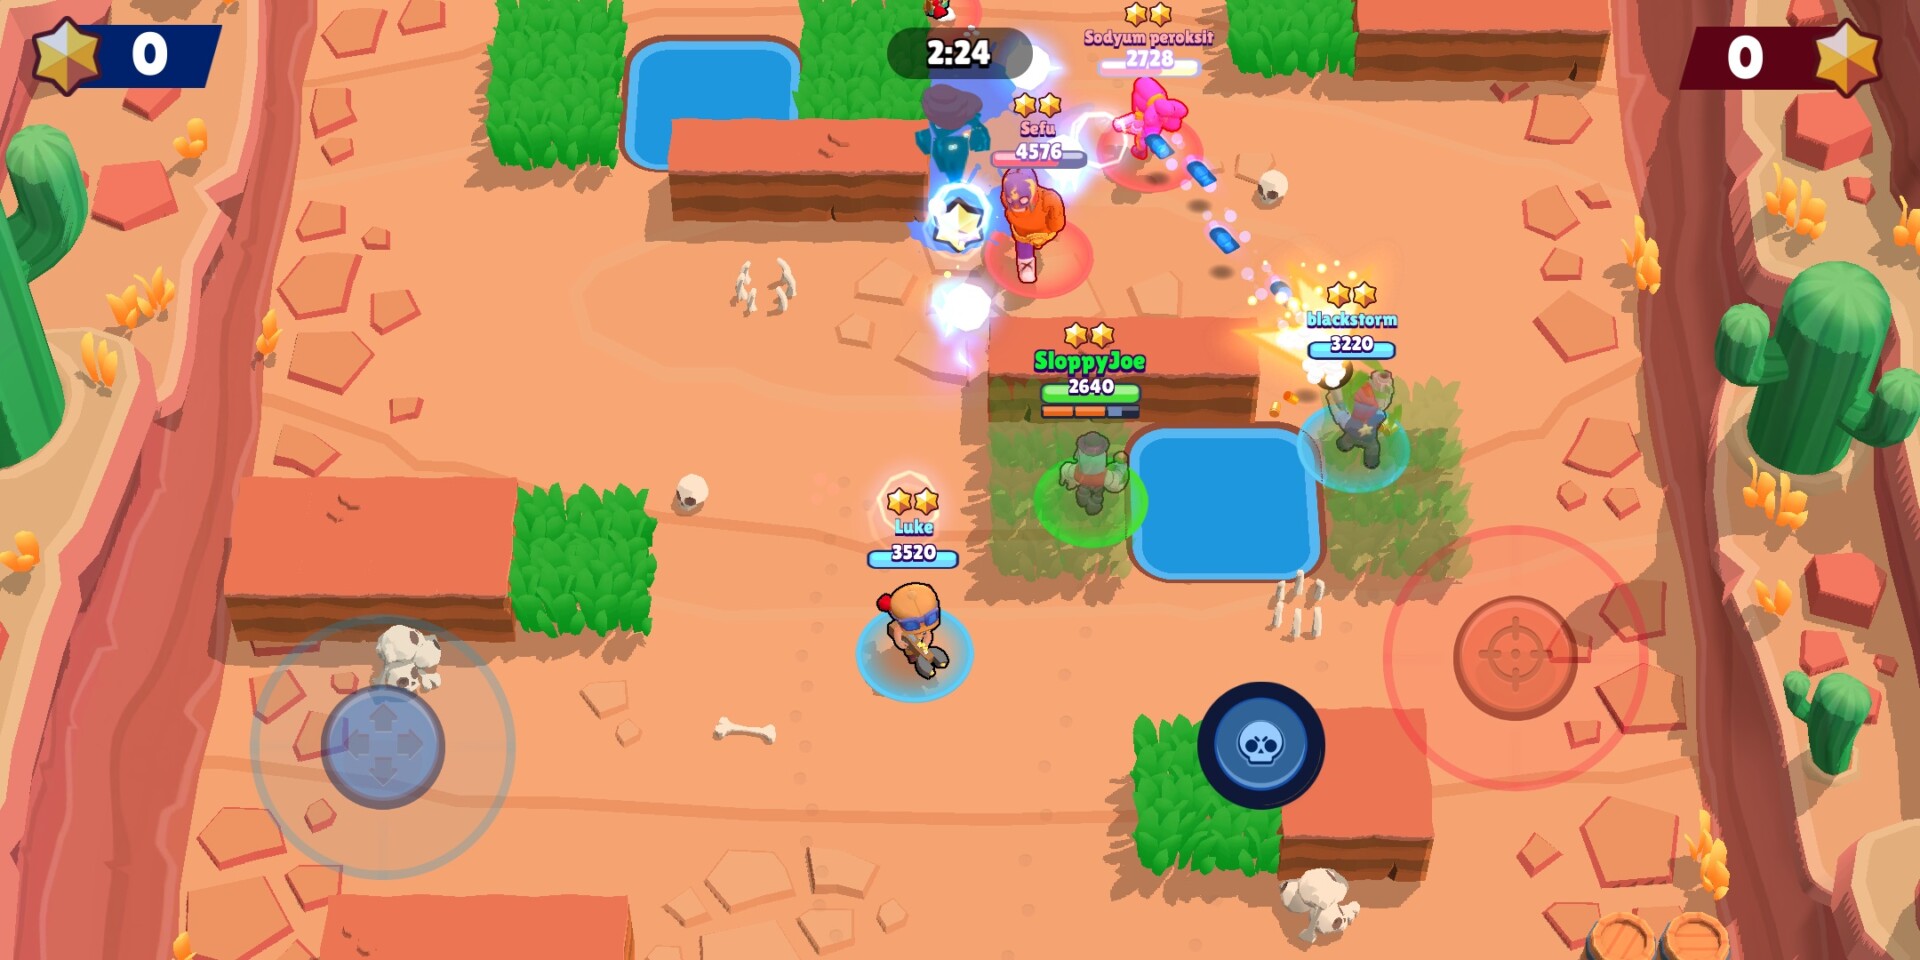 Find Out How to Play Brawl Stars and Learn Some Strategies